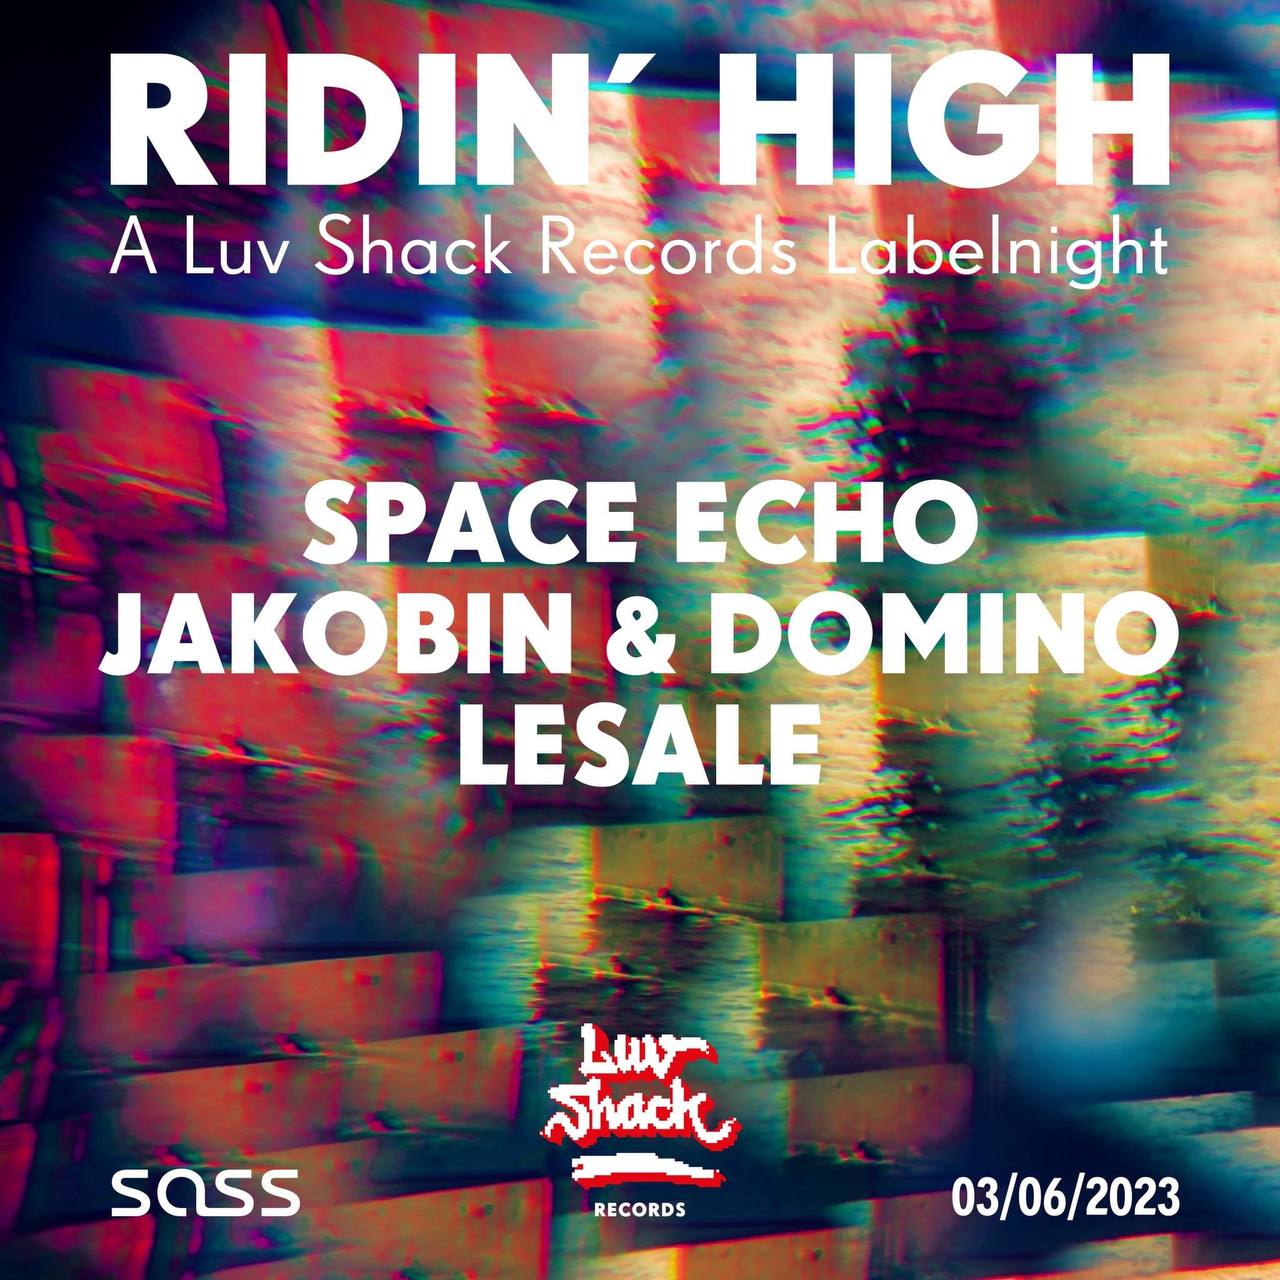 Ridin ' High - A Luv Shack Records Labelnight am 3. May 2023 @ SASS Music Club.